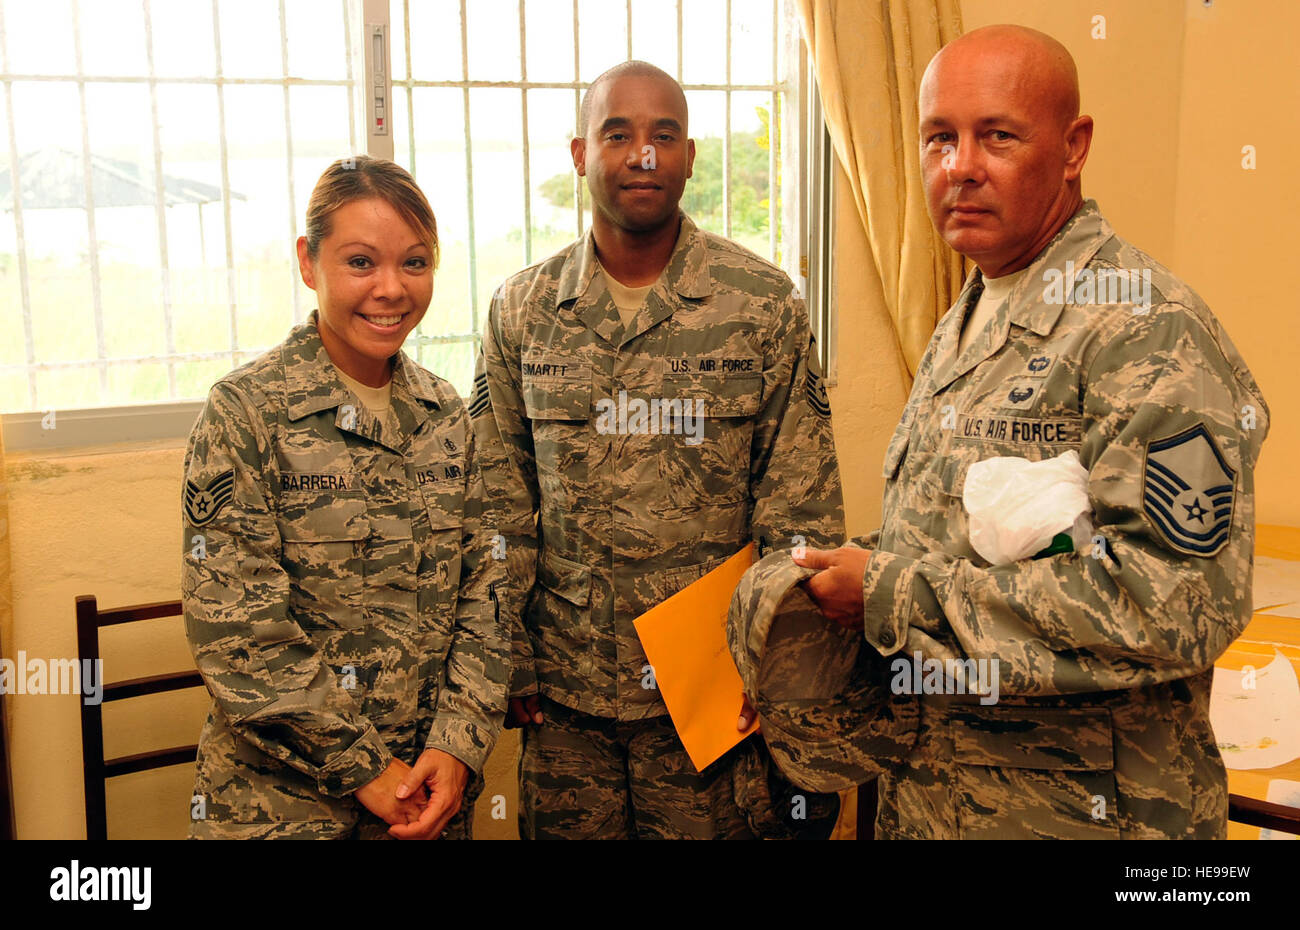 EDWARD BINYAH KESSELLY MILITARY BARRACKS, Liberia—(left to right) U.S. Air Force Staff Sgt. June Barrera, Operation ONWARD LIBERTY medical mentor to the Armed Forces of Liberia, U.S. Air Force Master Sgt. Yumon Smartt, OOL medical noncommissioned officer in charge, and U.S. Air Force Master Sgt. Mark Williams, OOL transportation mentor to the AFL, attend a meeting with U.S. Army Brig. Gen. Burton Francisco, assistant adjutant general and commander, Michigan National Guard, at Edward Binyah Kesselly Military Barracks June 11. OOL is a group of approximately 50 U.S. military personnel who mentor Stock Photo